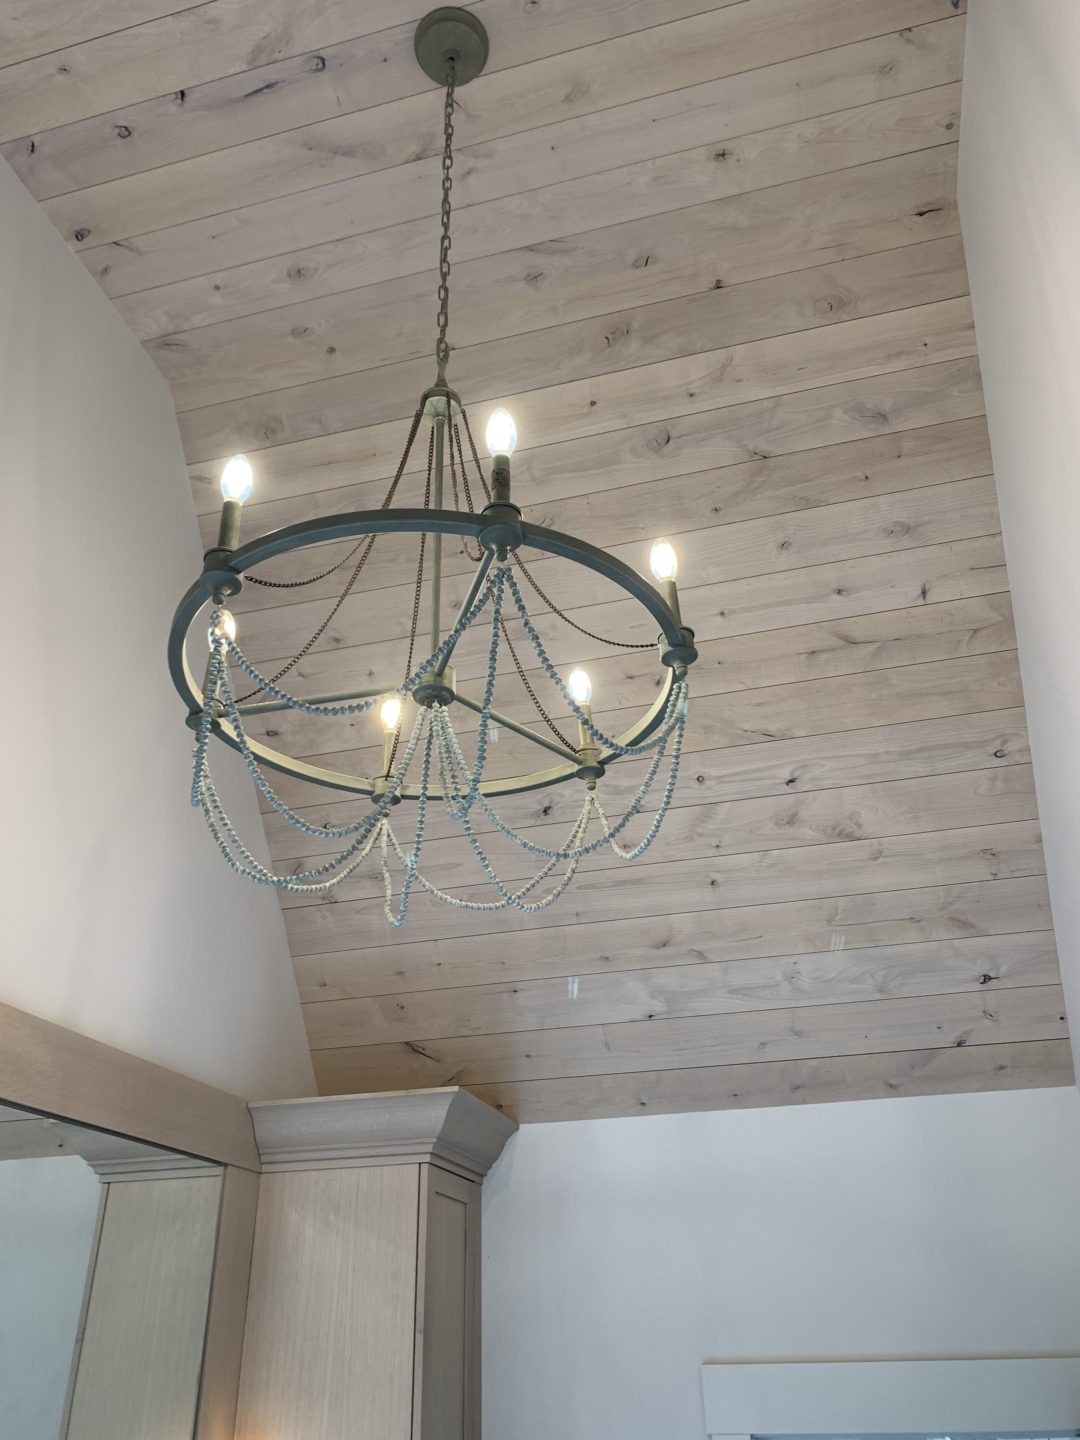 evergreen-portfolio-hinckley-transitional-french-country-interior-lighting-details-wood-paneling